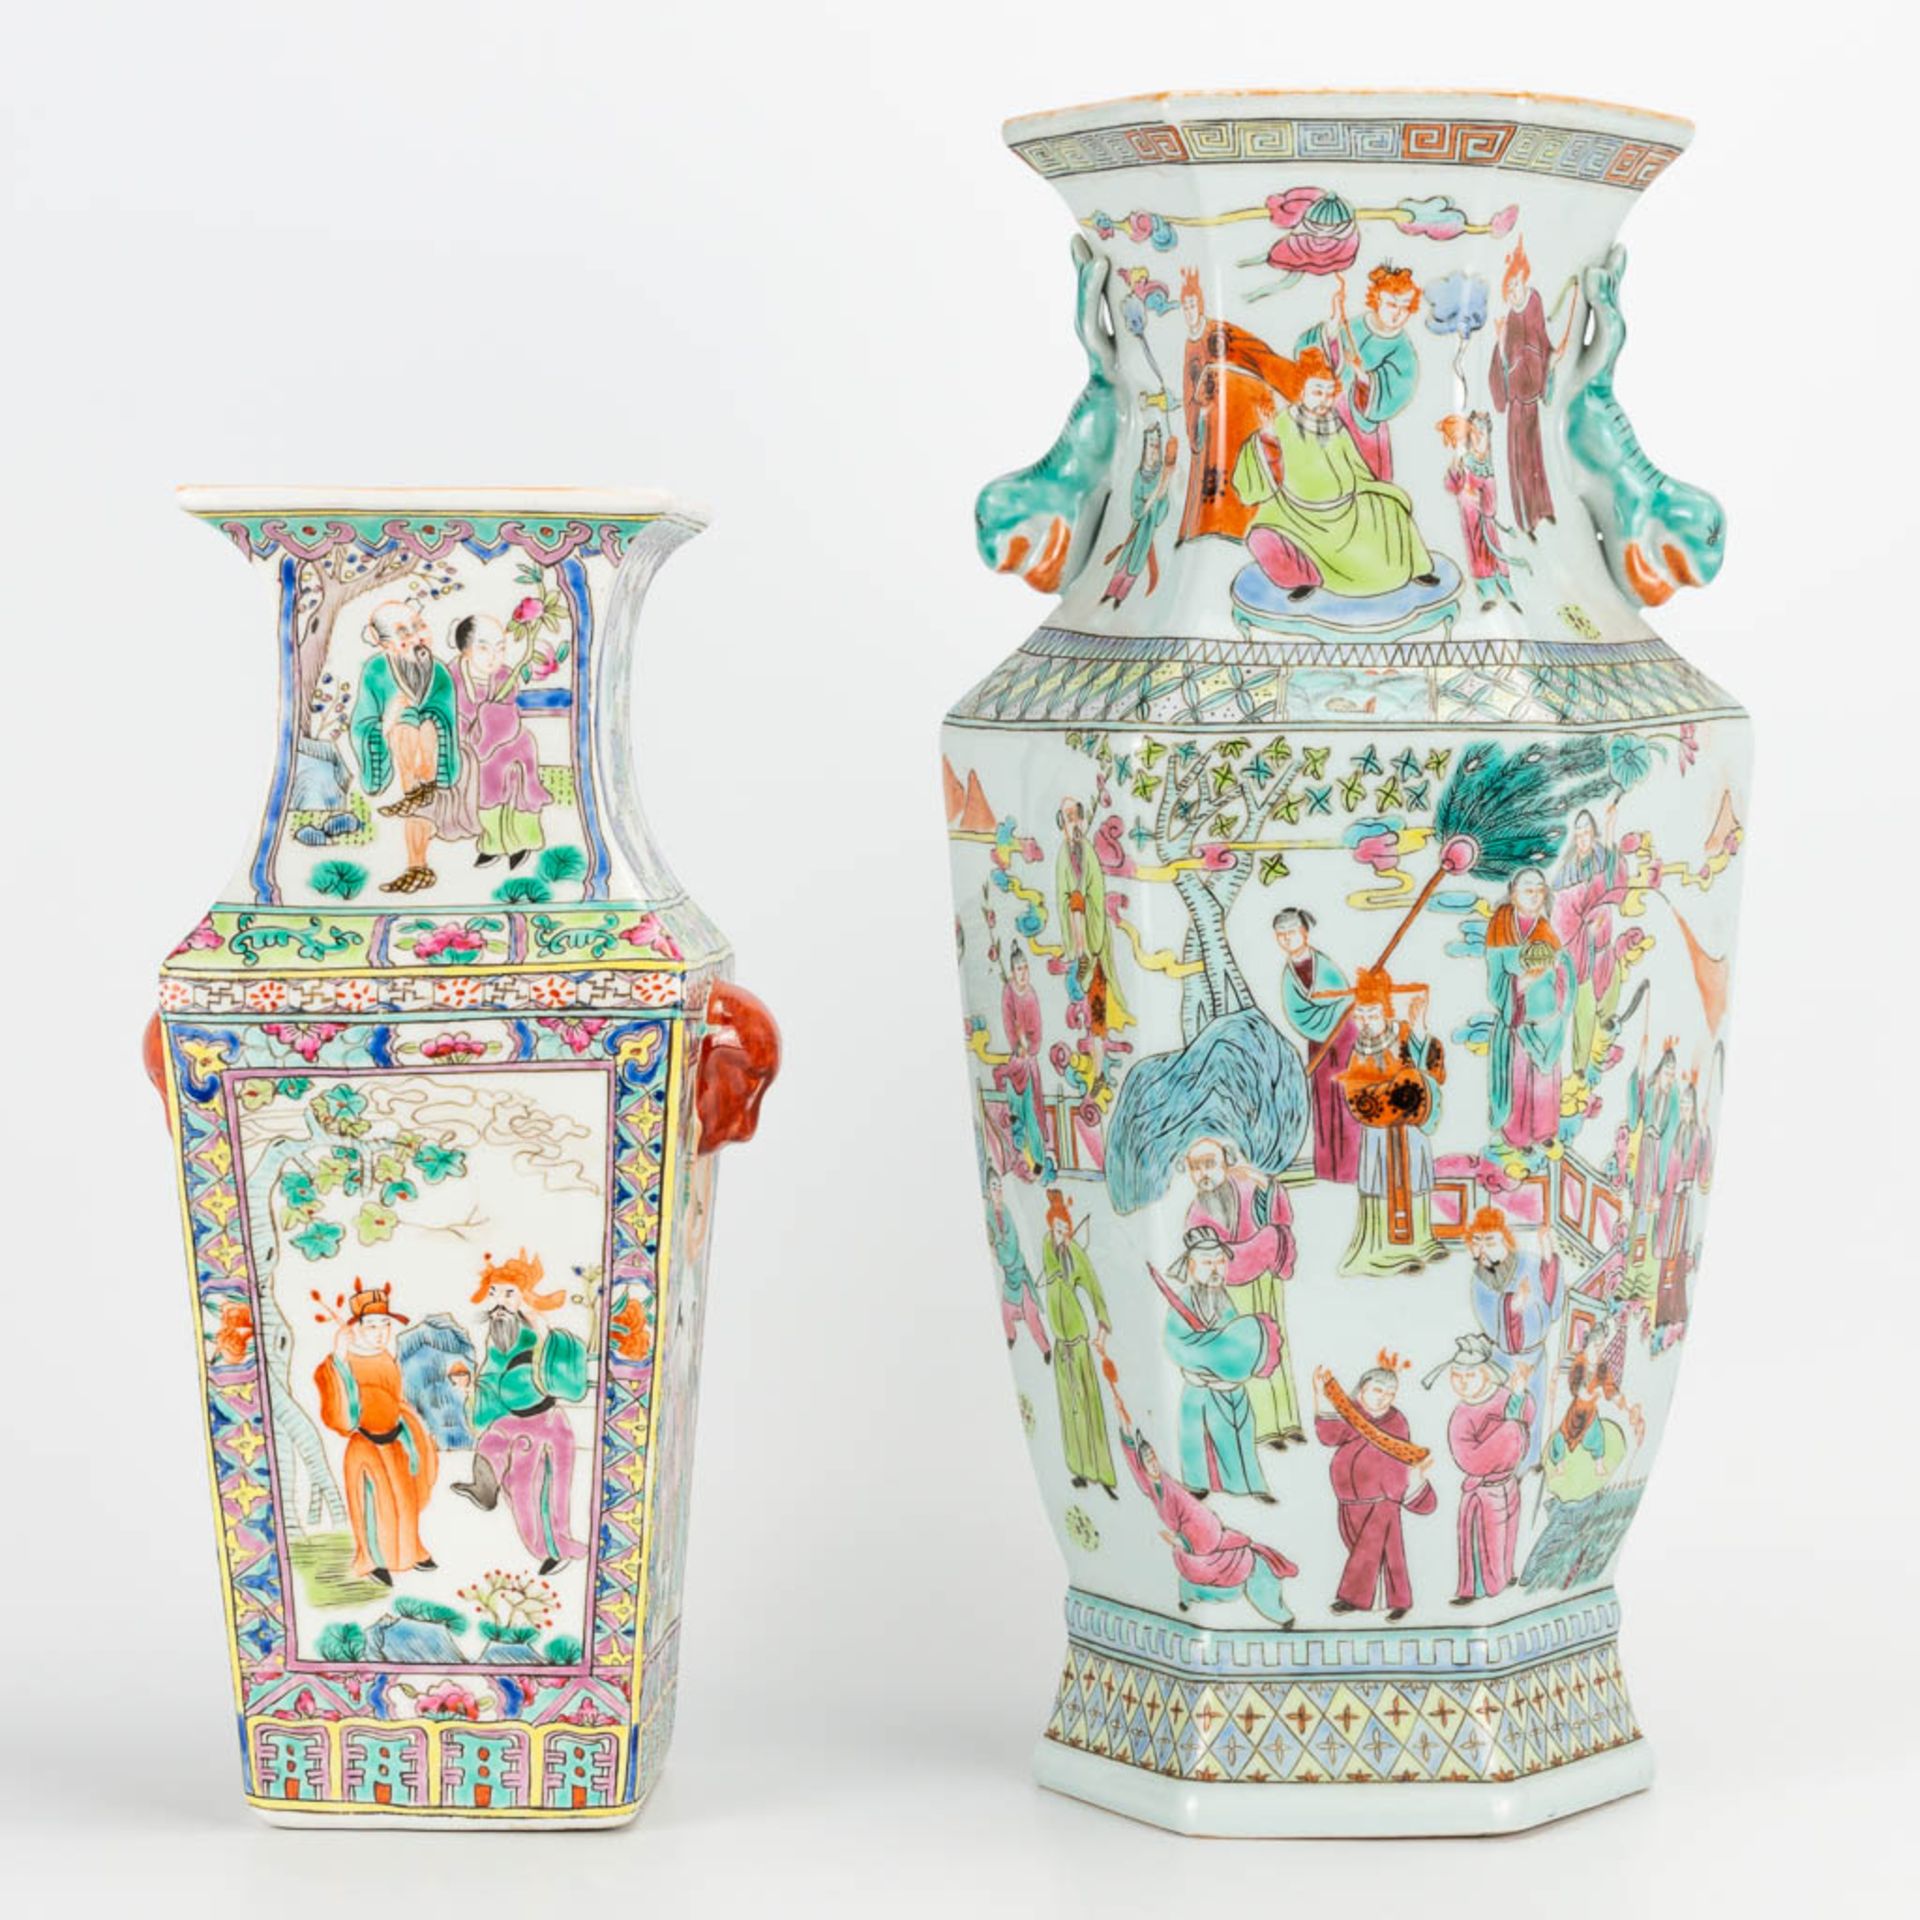 A collection of 2 Chinese vases with decor of emperors, playing children and ladies in court. 20th c - Image 4 of 29